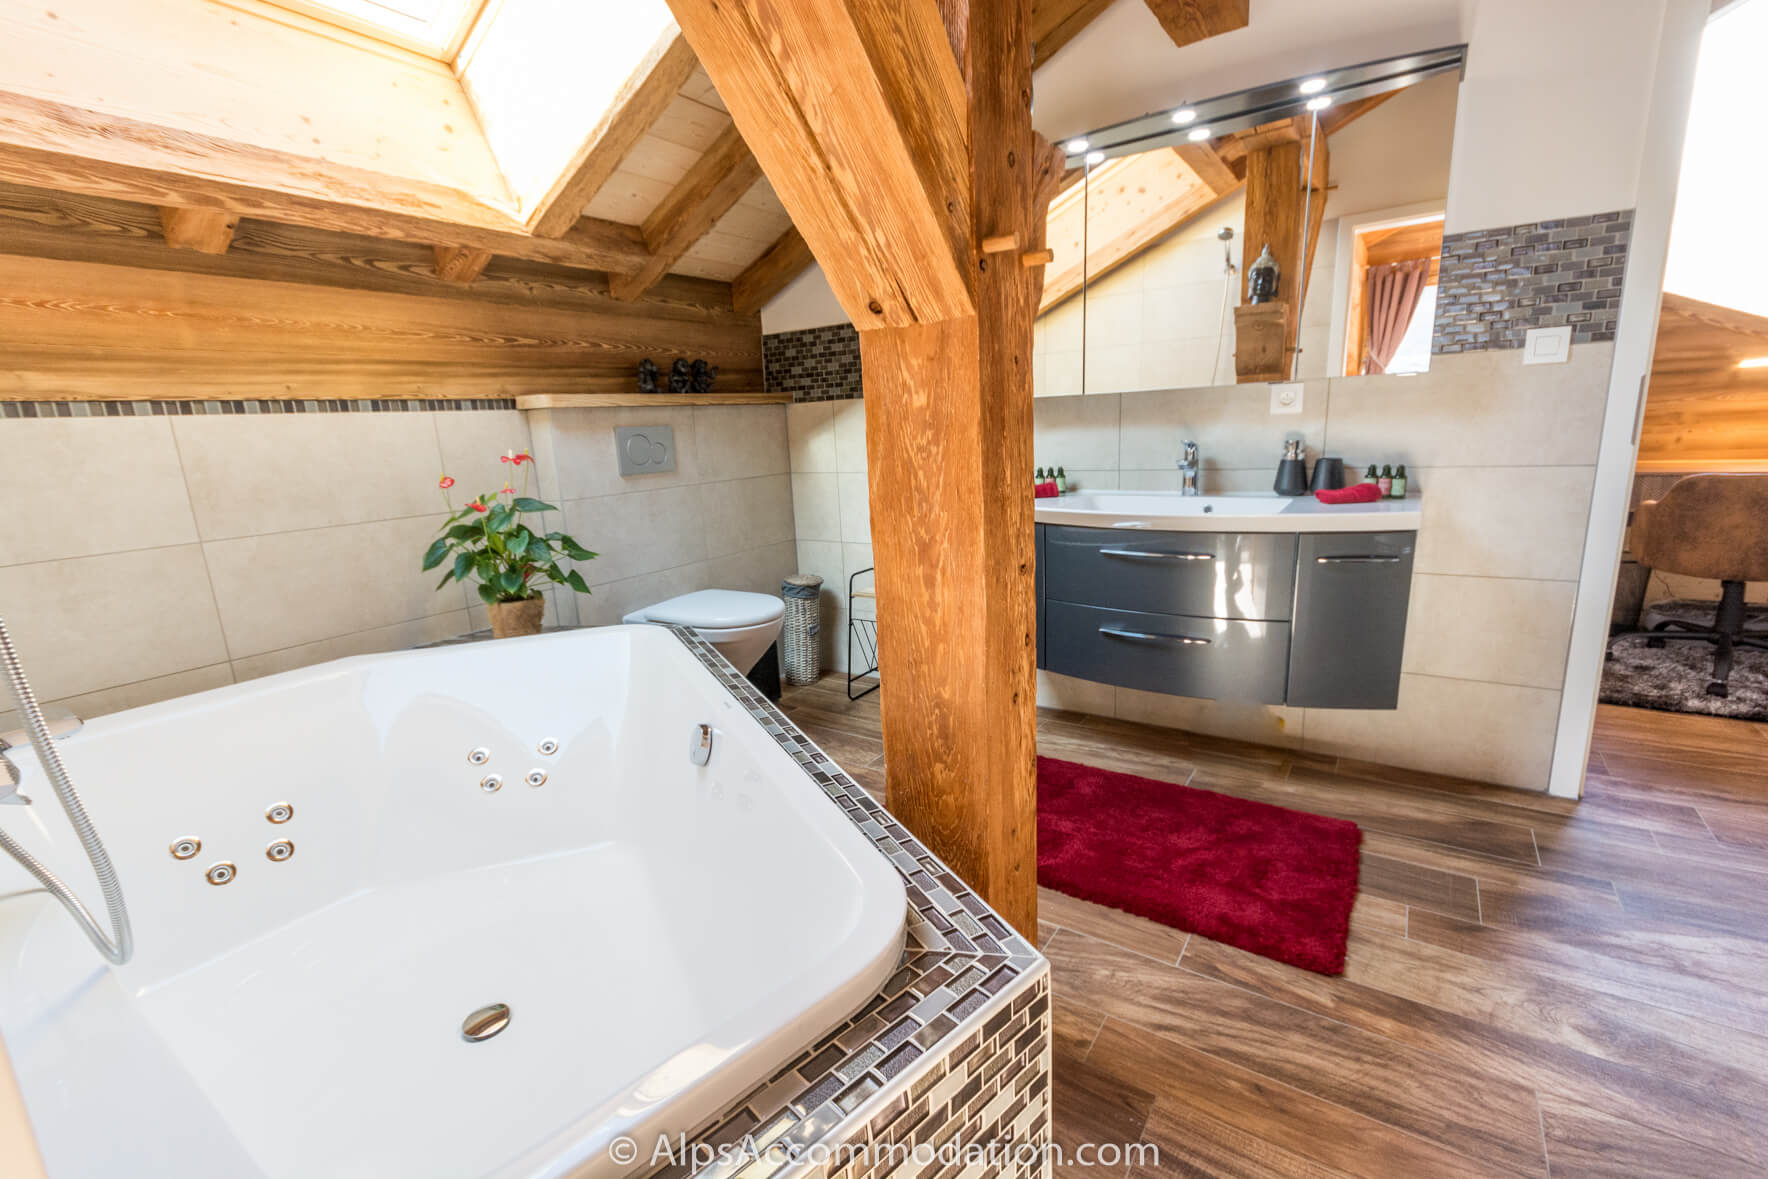 Chalet Sole Mio Morillon - Relax in the jacuzzi bath after a long day skiing